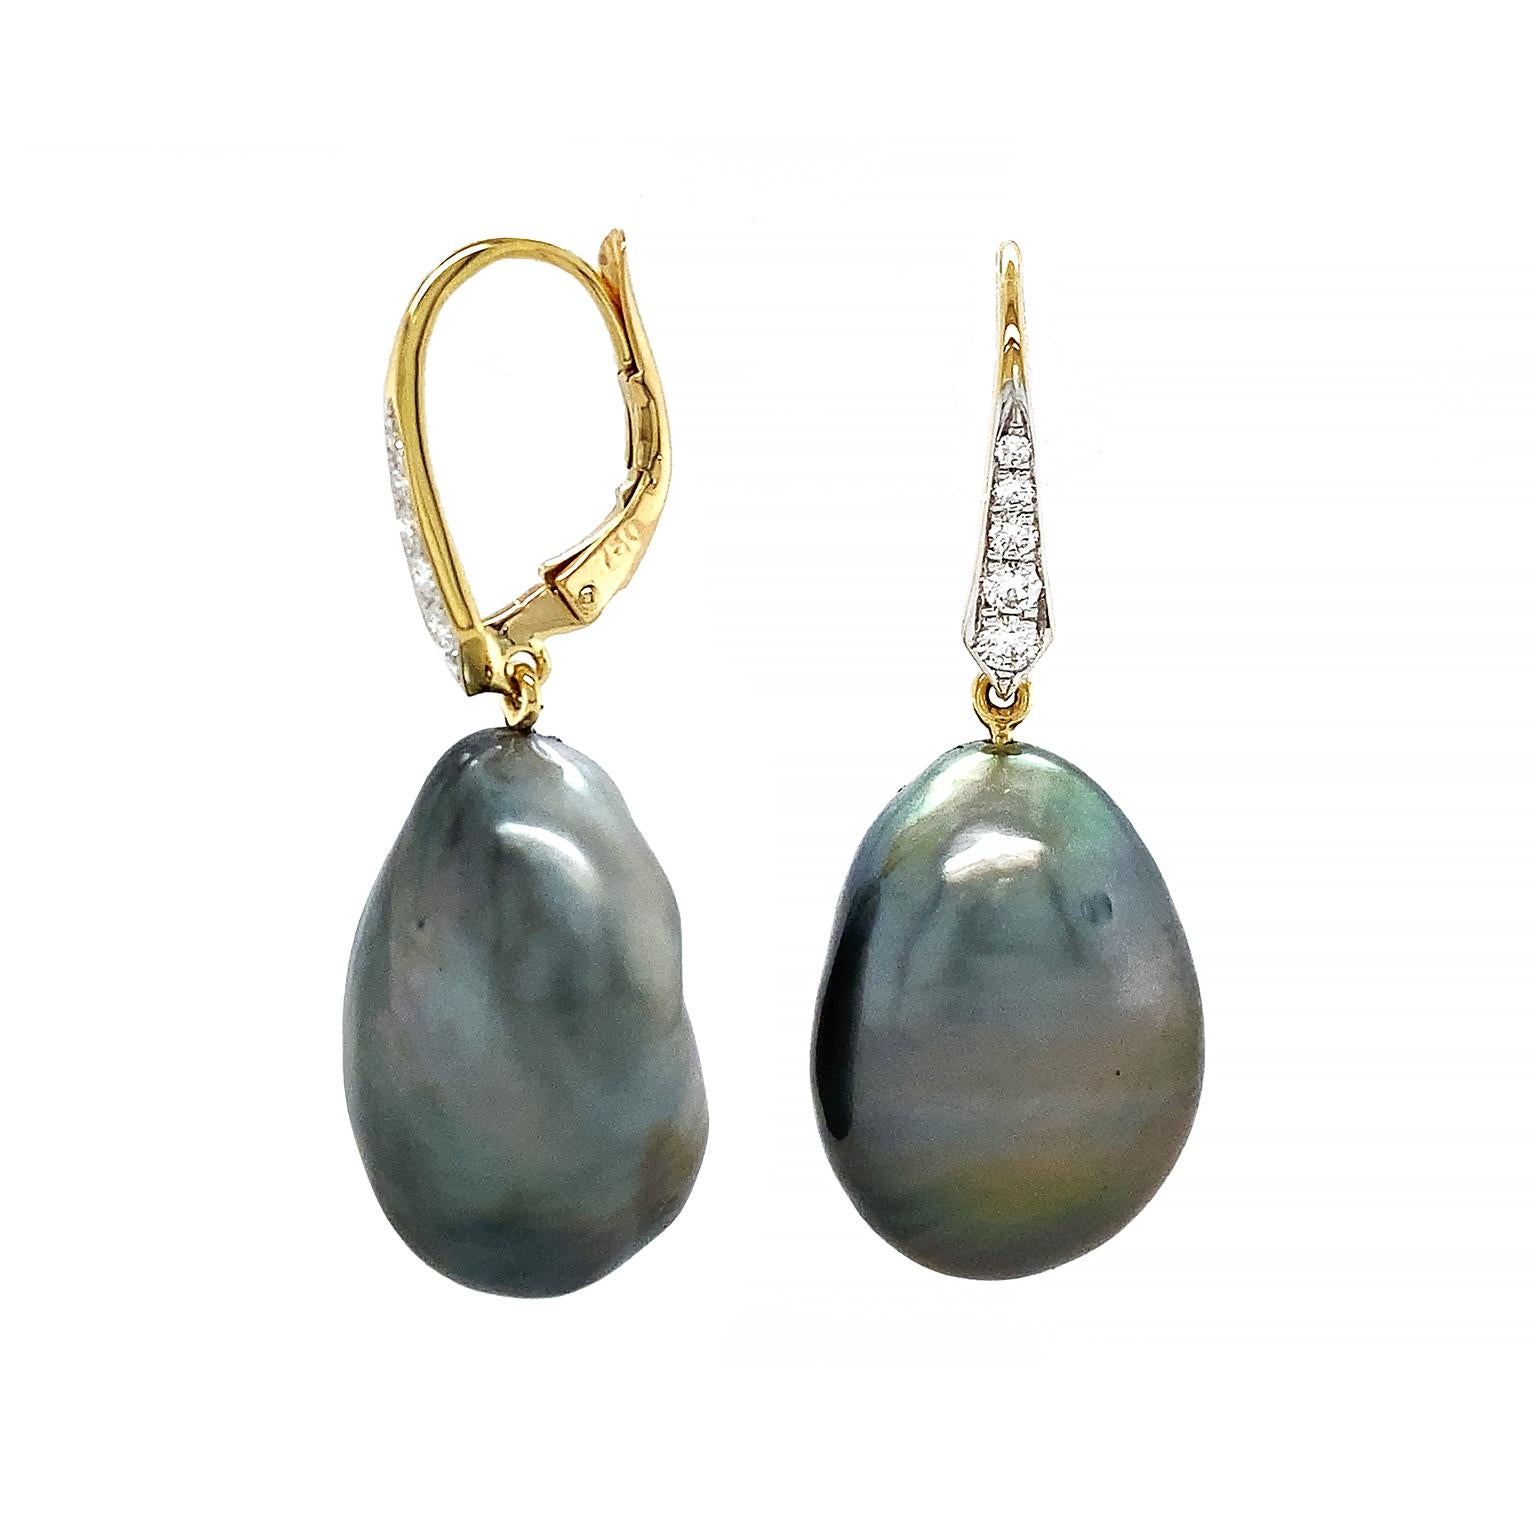 A prismatic sheen of blue, green and purple is created when the light falls upon these dark gray Tahitian pearl earrings. The baroque pearls are in a teardrop outline, while their irregular shapes form a unique pairing. 18k yellow gold lever backs